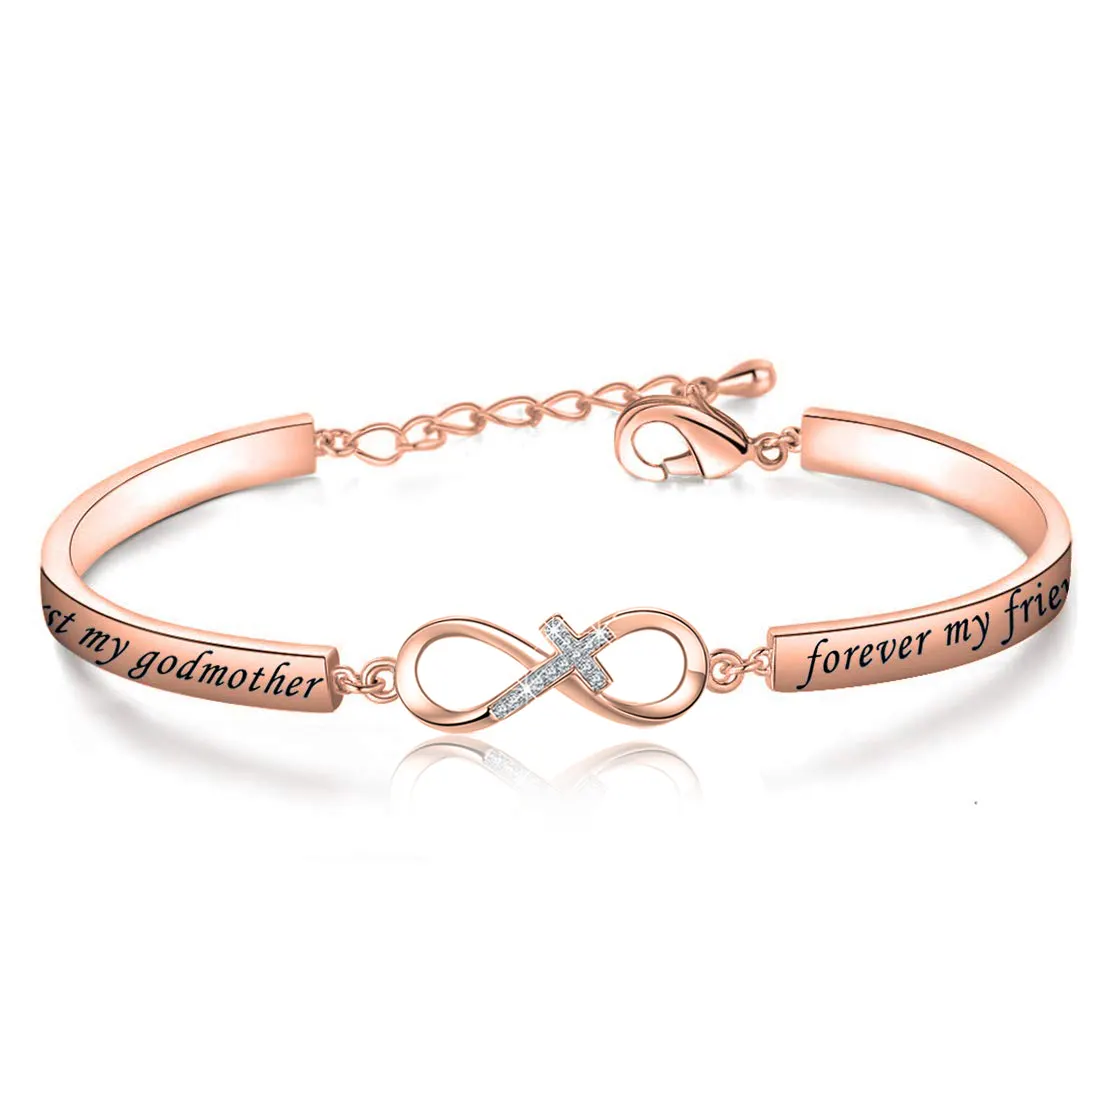 Infinity Cross Shape With First my godmother forever my friends Words Linking The Bangle Jewelry For Family Love